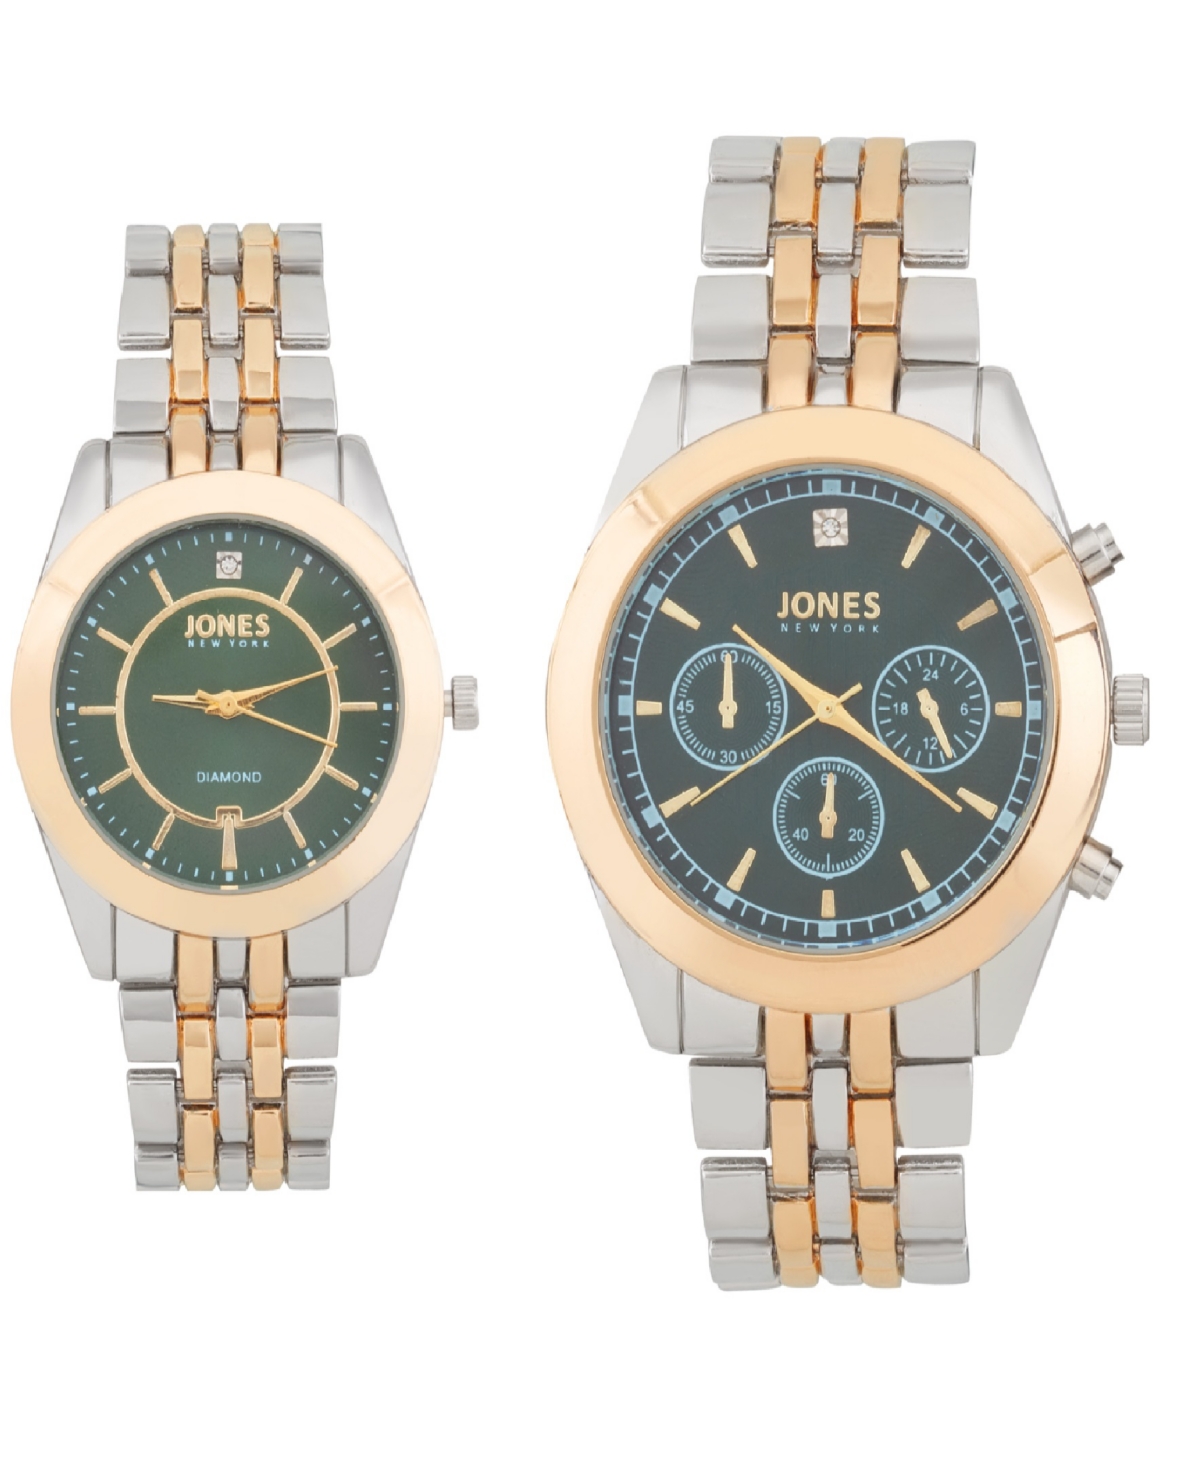 Men and Women's Analog Shiny Two-Tone Metal Bracelet His Hers Watch 42mm, 34mm Gift Set - Green, Gold, Silver